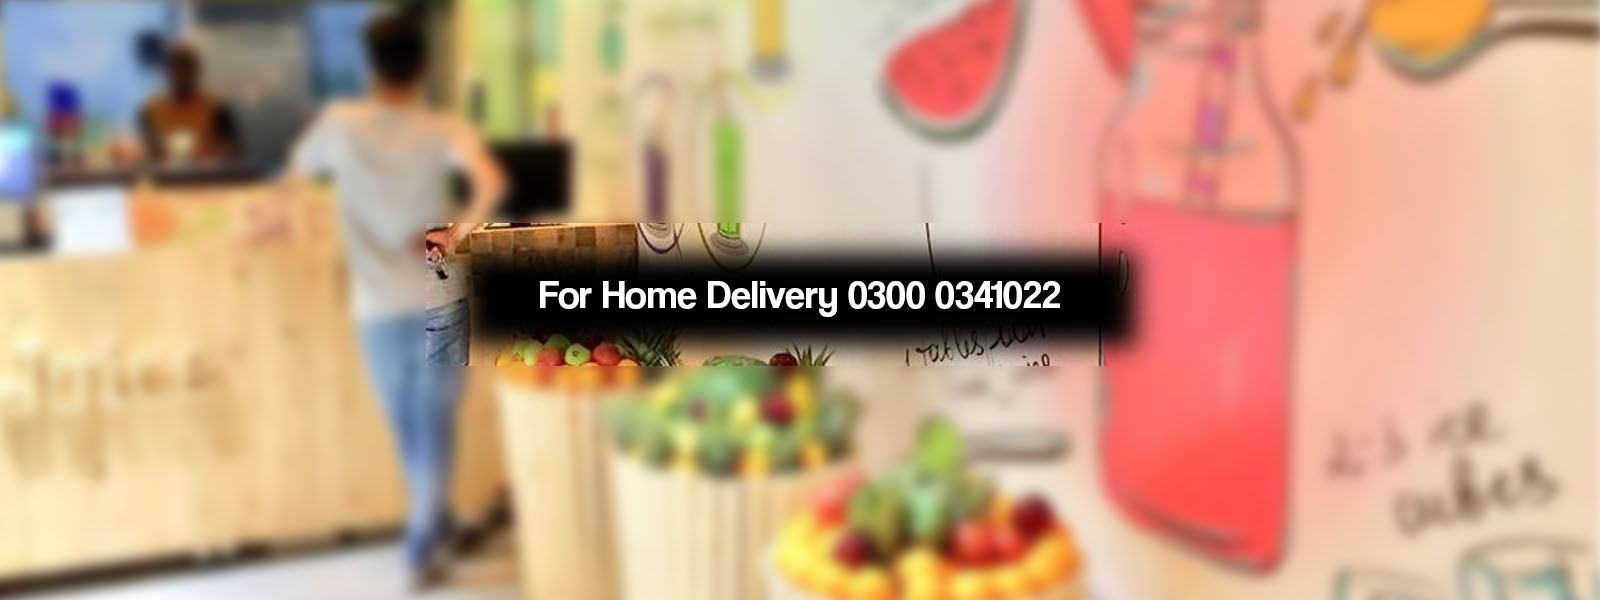 fruit-teria-bahria-town-islamabad-to-order-call-0300-0341022